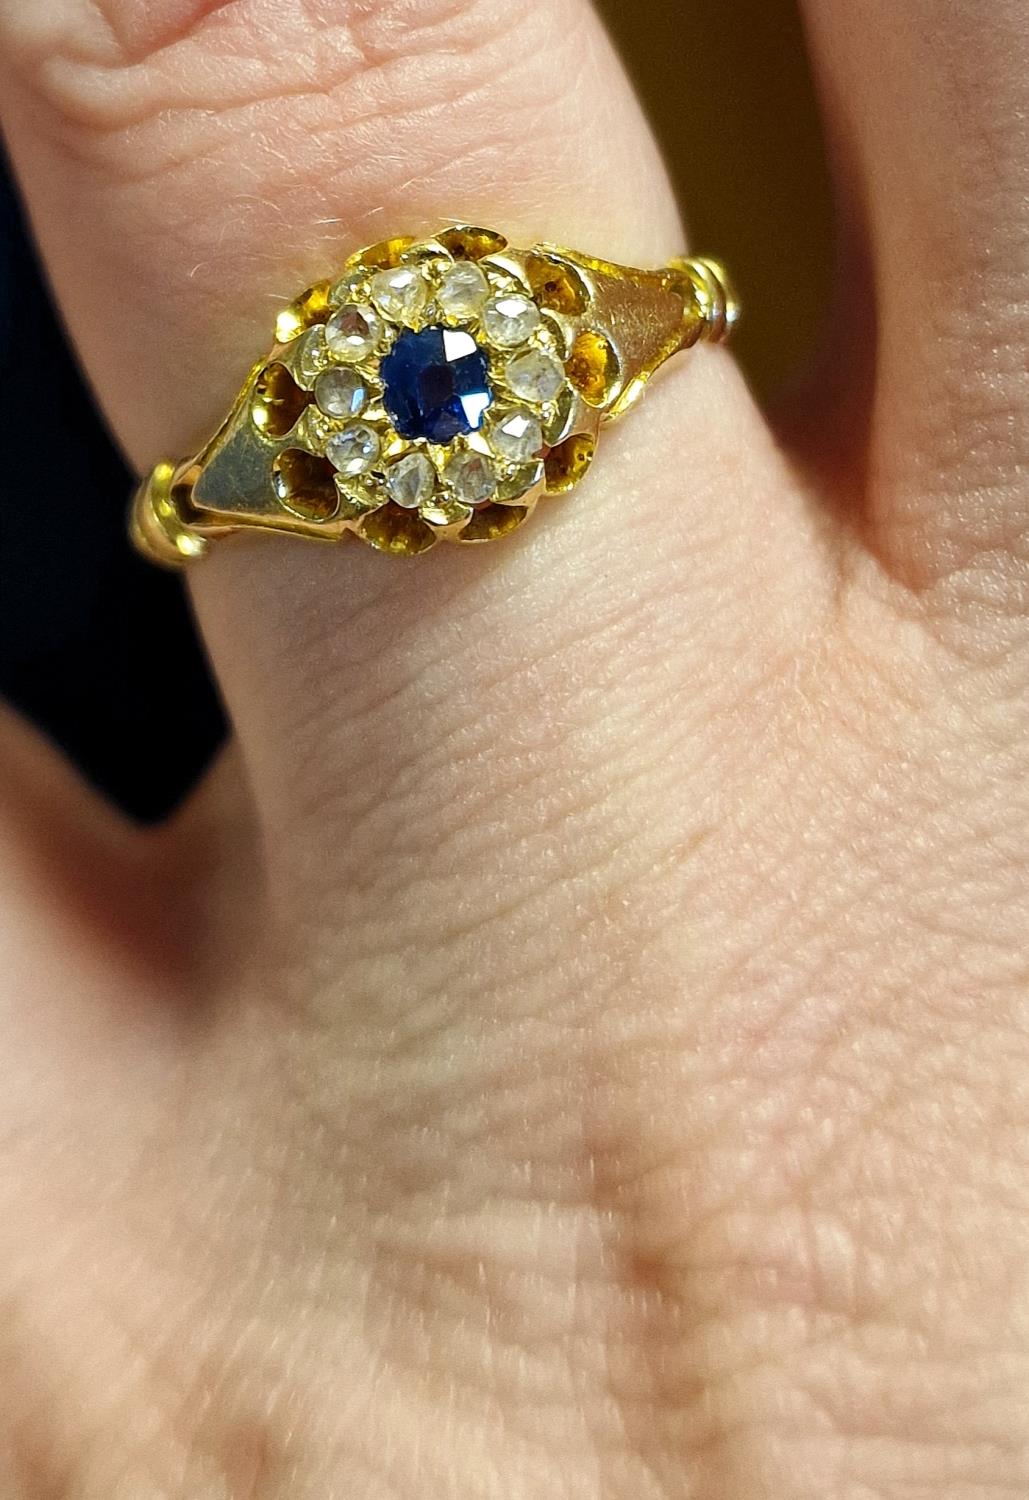 18ct Gold, Sapphire and Diamond Cluster Dress Ring - size P+0.5, 3.2g - Image 2 of 3